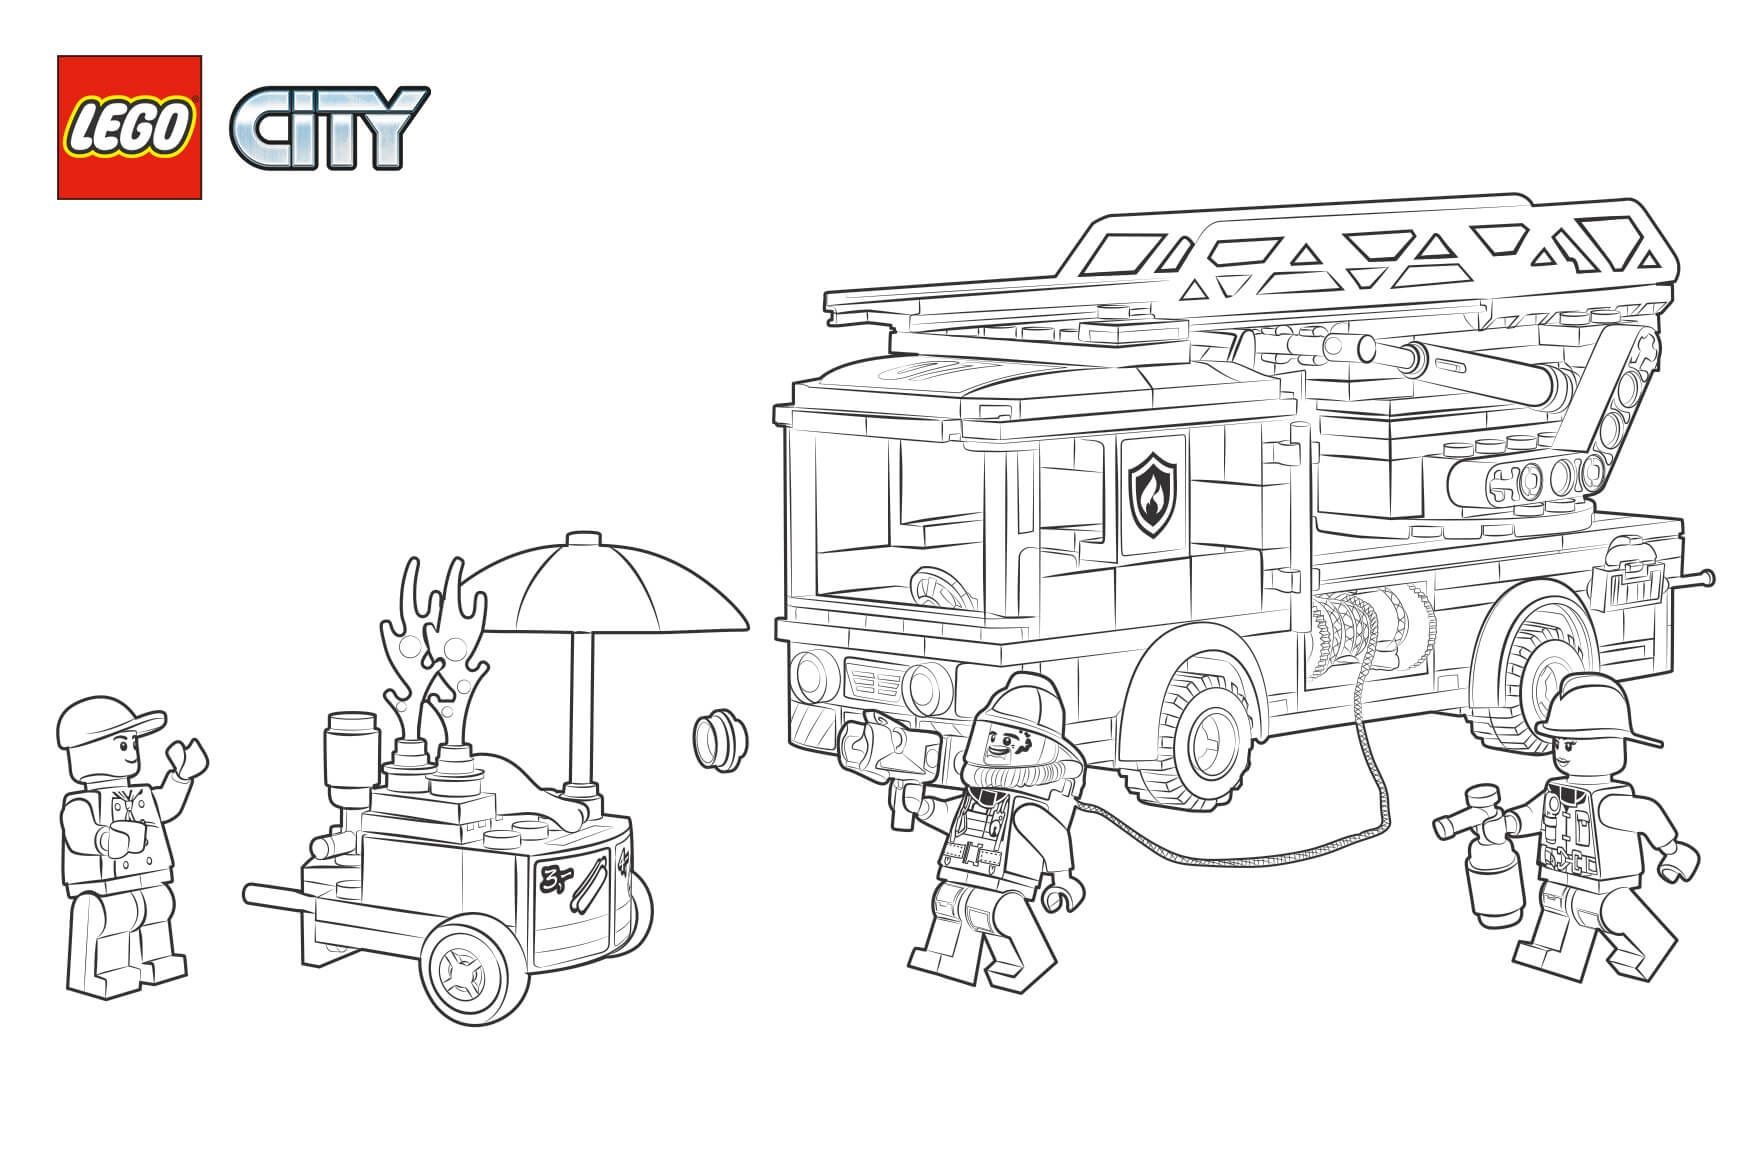 Lego city coloring page